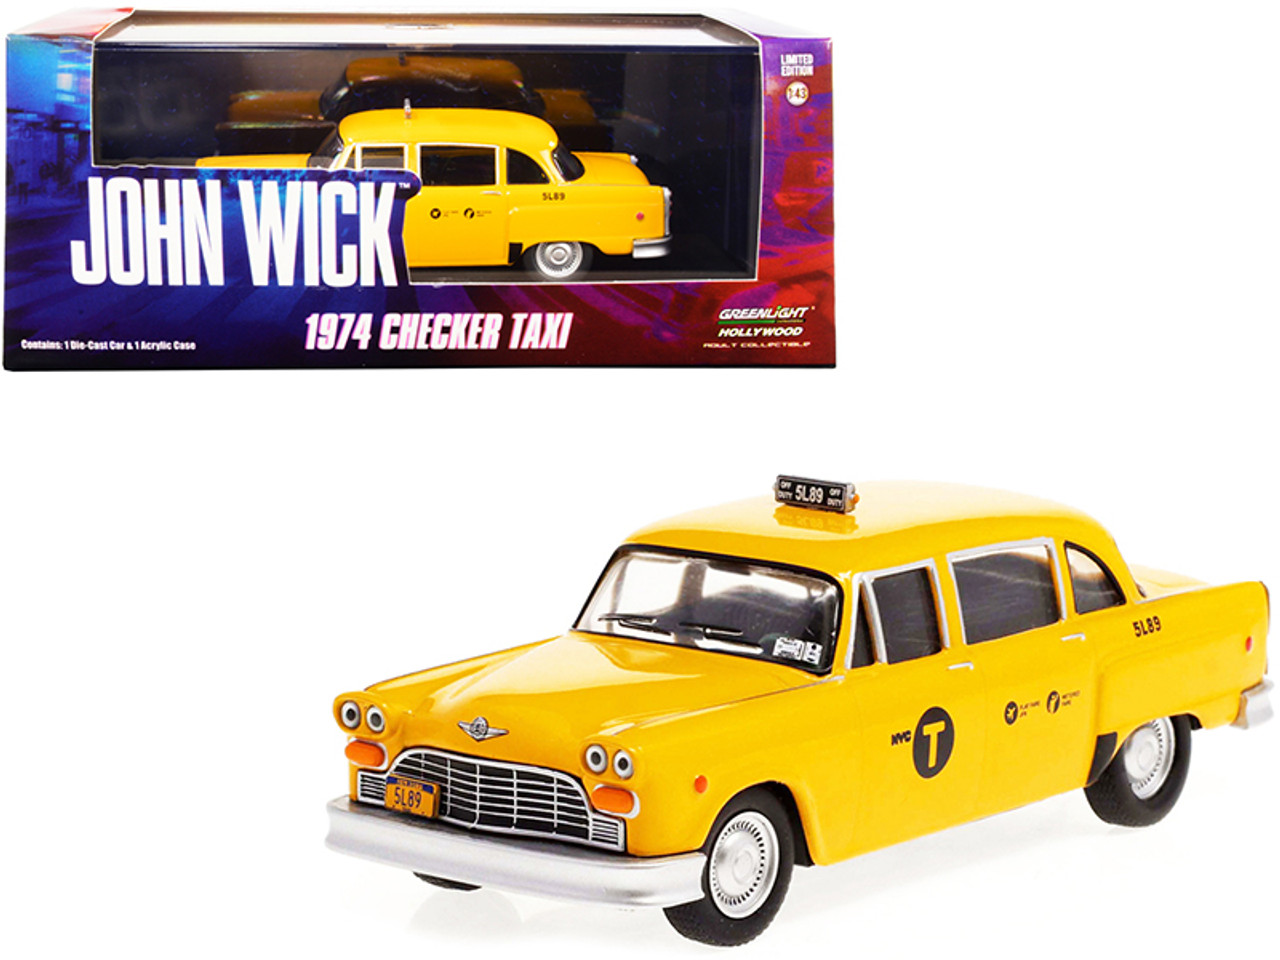 1974 Checker Yellow #5L89 "N.Y.C. Taxi" "John Wick: Chapter 3 - Parabellum" (2019) Movie 1/43 Diecast Model Car by Greenlight